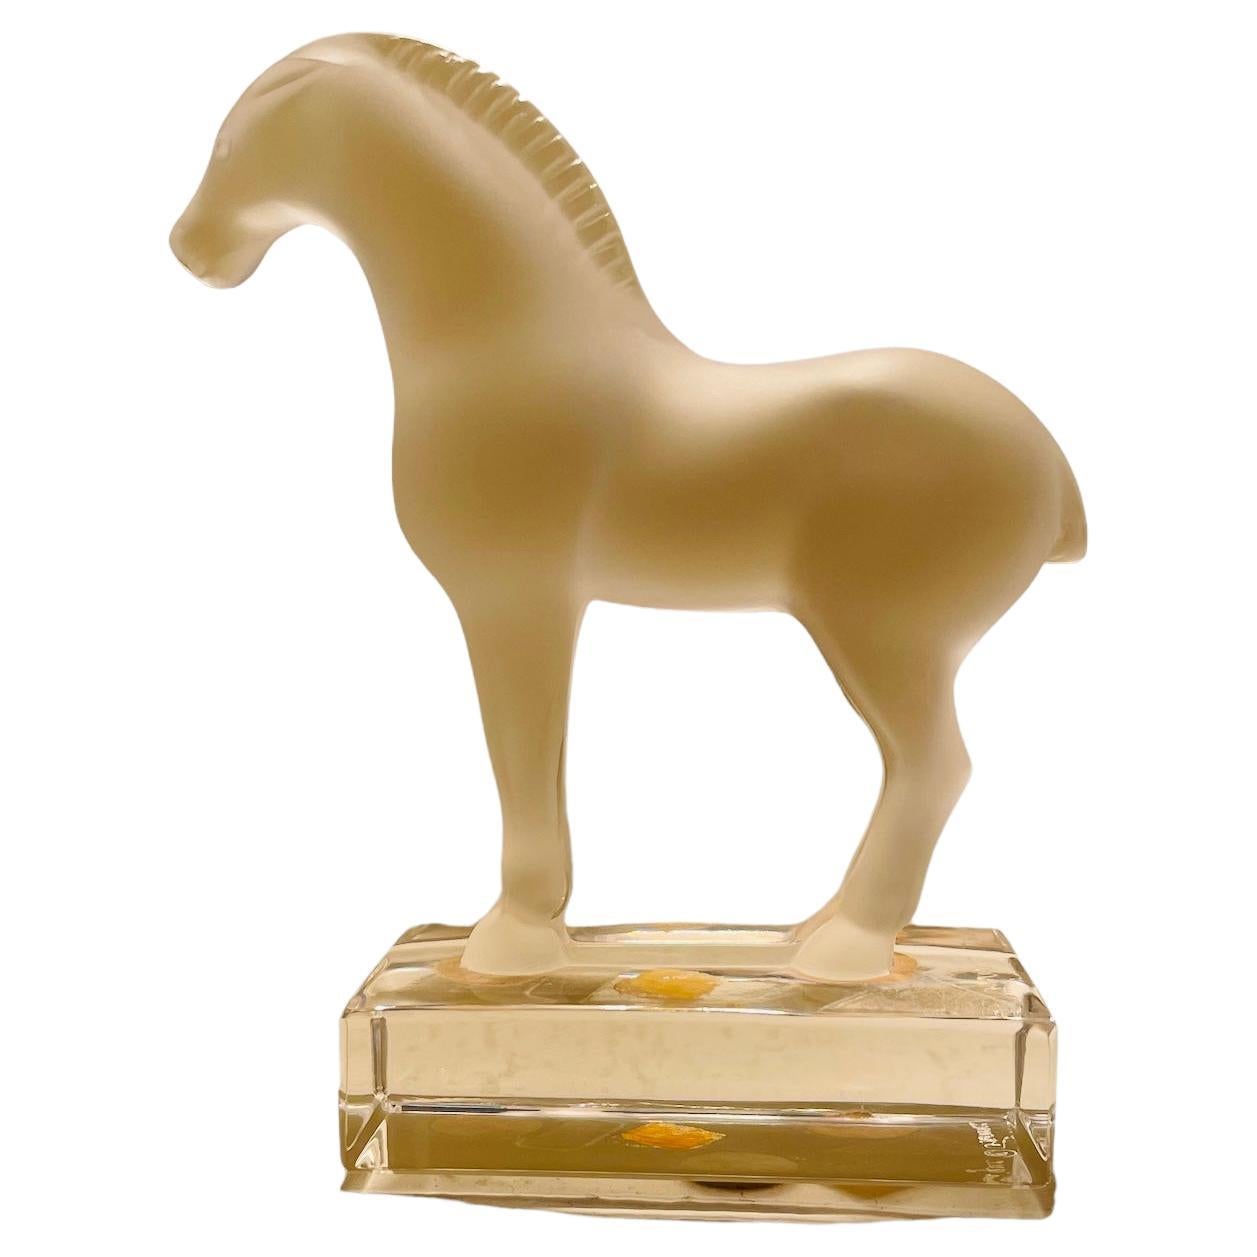 This is a Lalique frosted and clear crystal “Tang” Horse sculpture /figurine. The powerful horse is standing up straight with strong muscles, well groomed mane and tail. Below the rectangular clear crystal base is the acid etched Lalique hallmark.